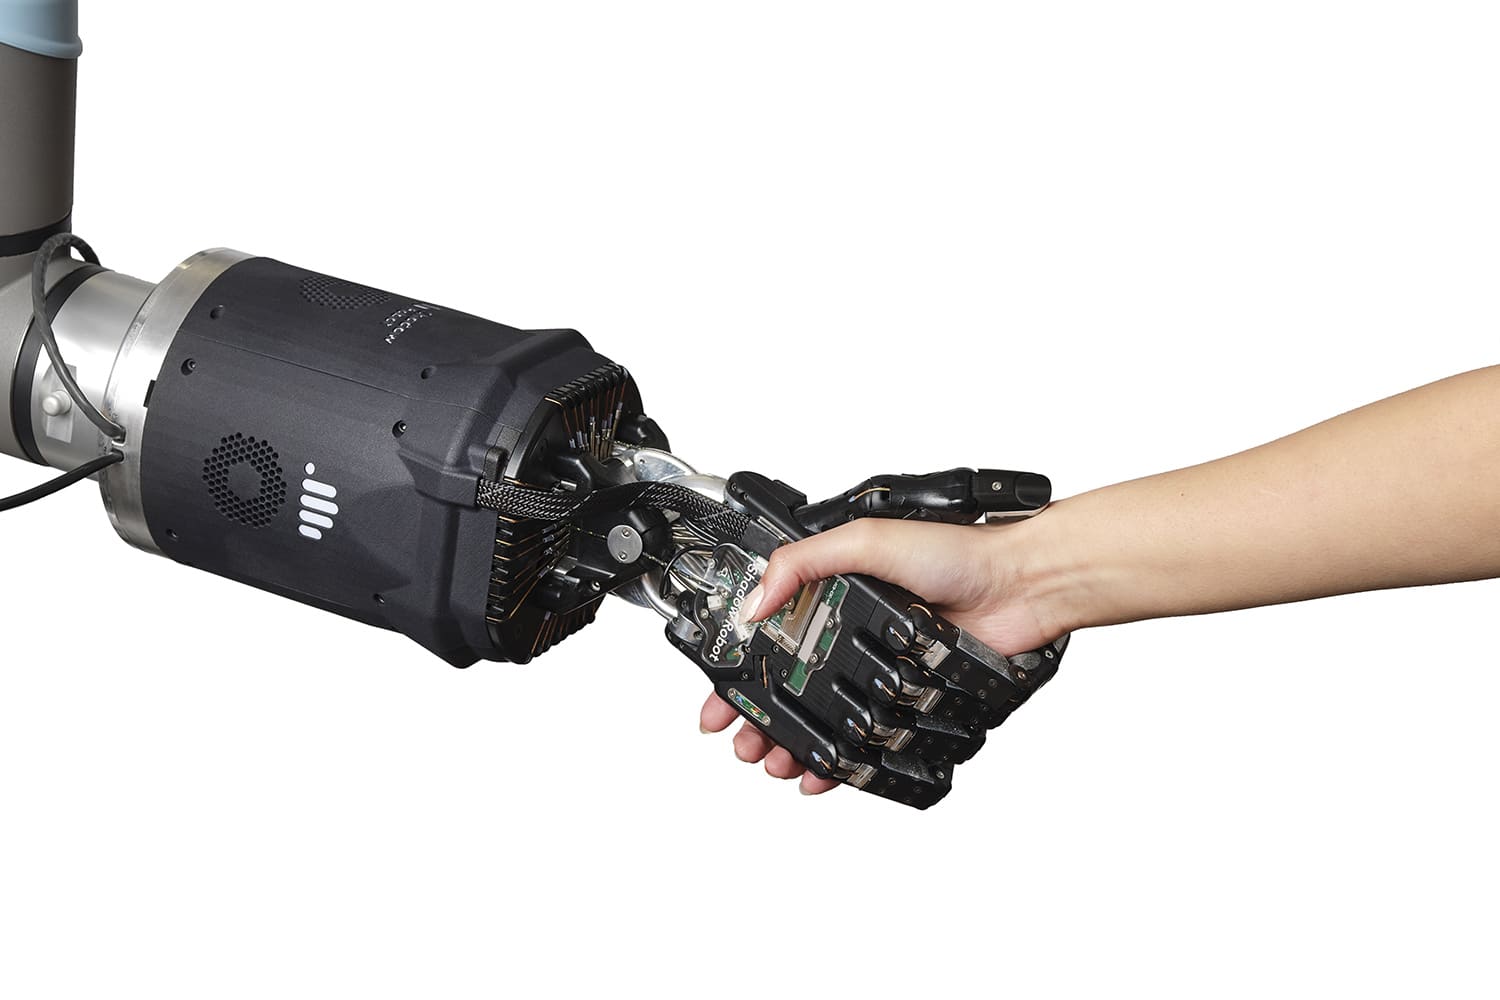 What happens when you buy a robot hand?